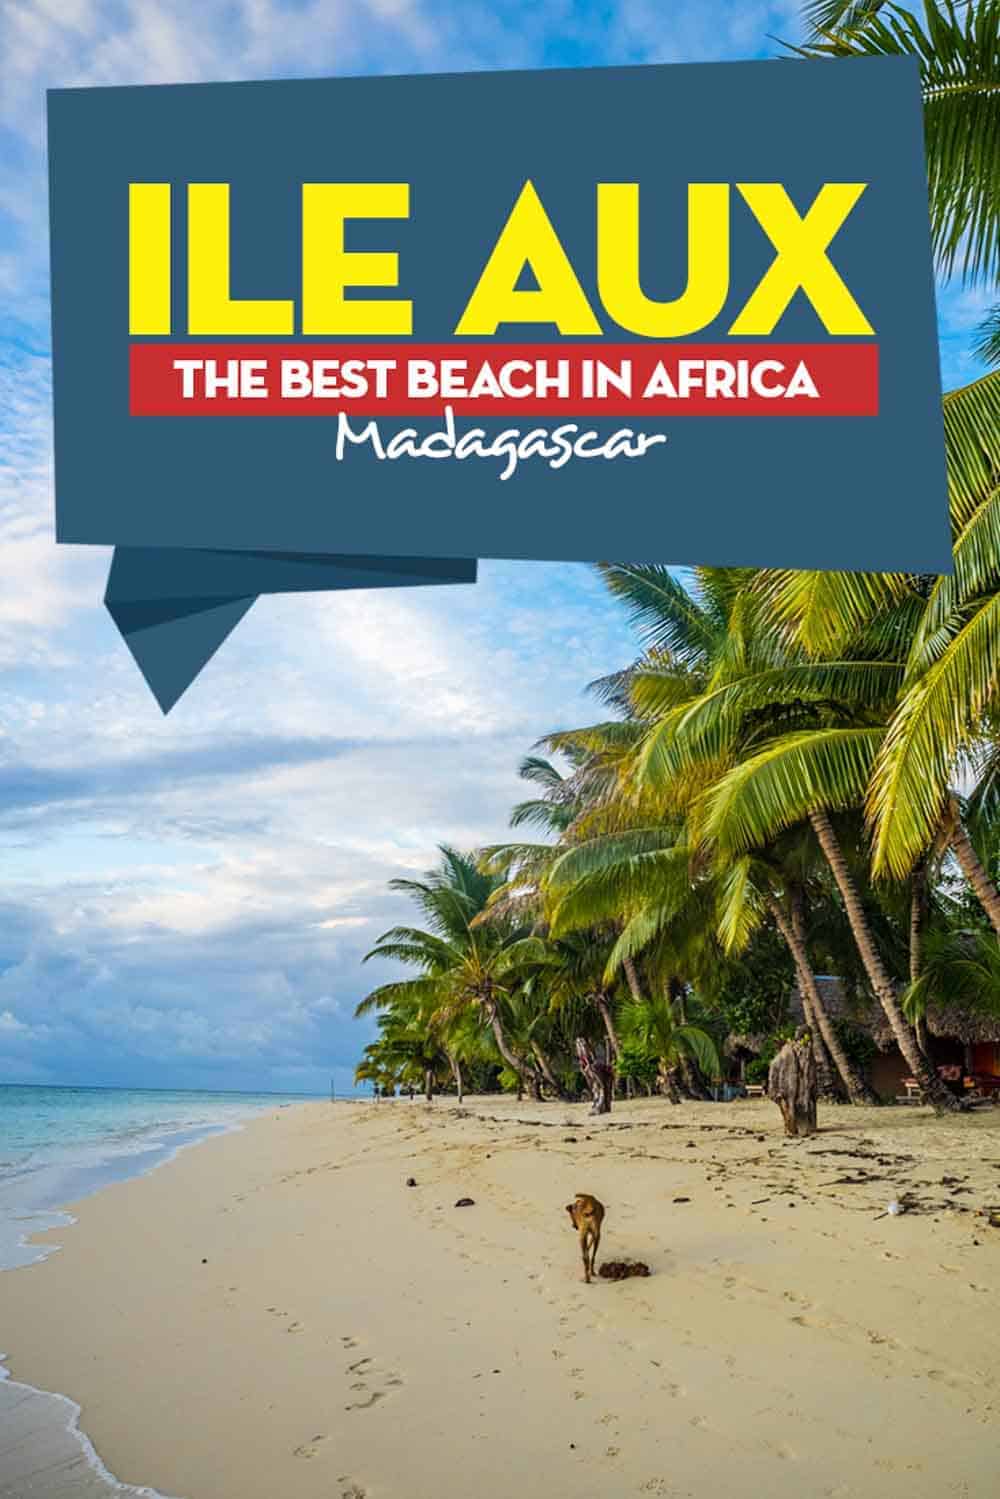 Travel guide to Ile Aux Nattes is a true African paradise. Located of the east coast of Madagascar, here the complete guide how to visit some of the best beaches in the world.